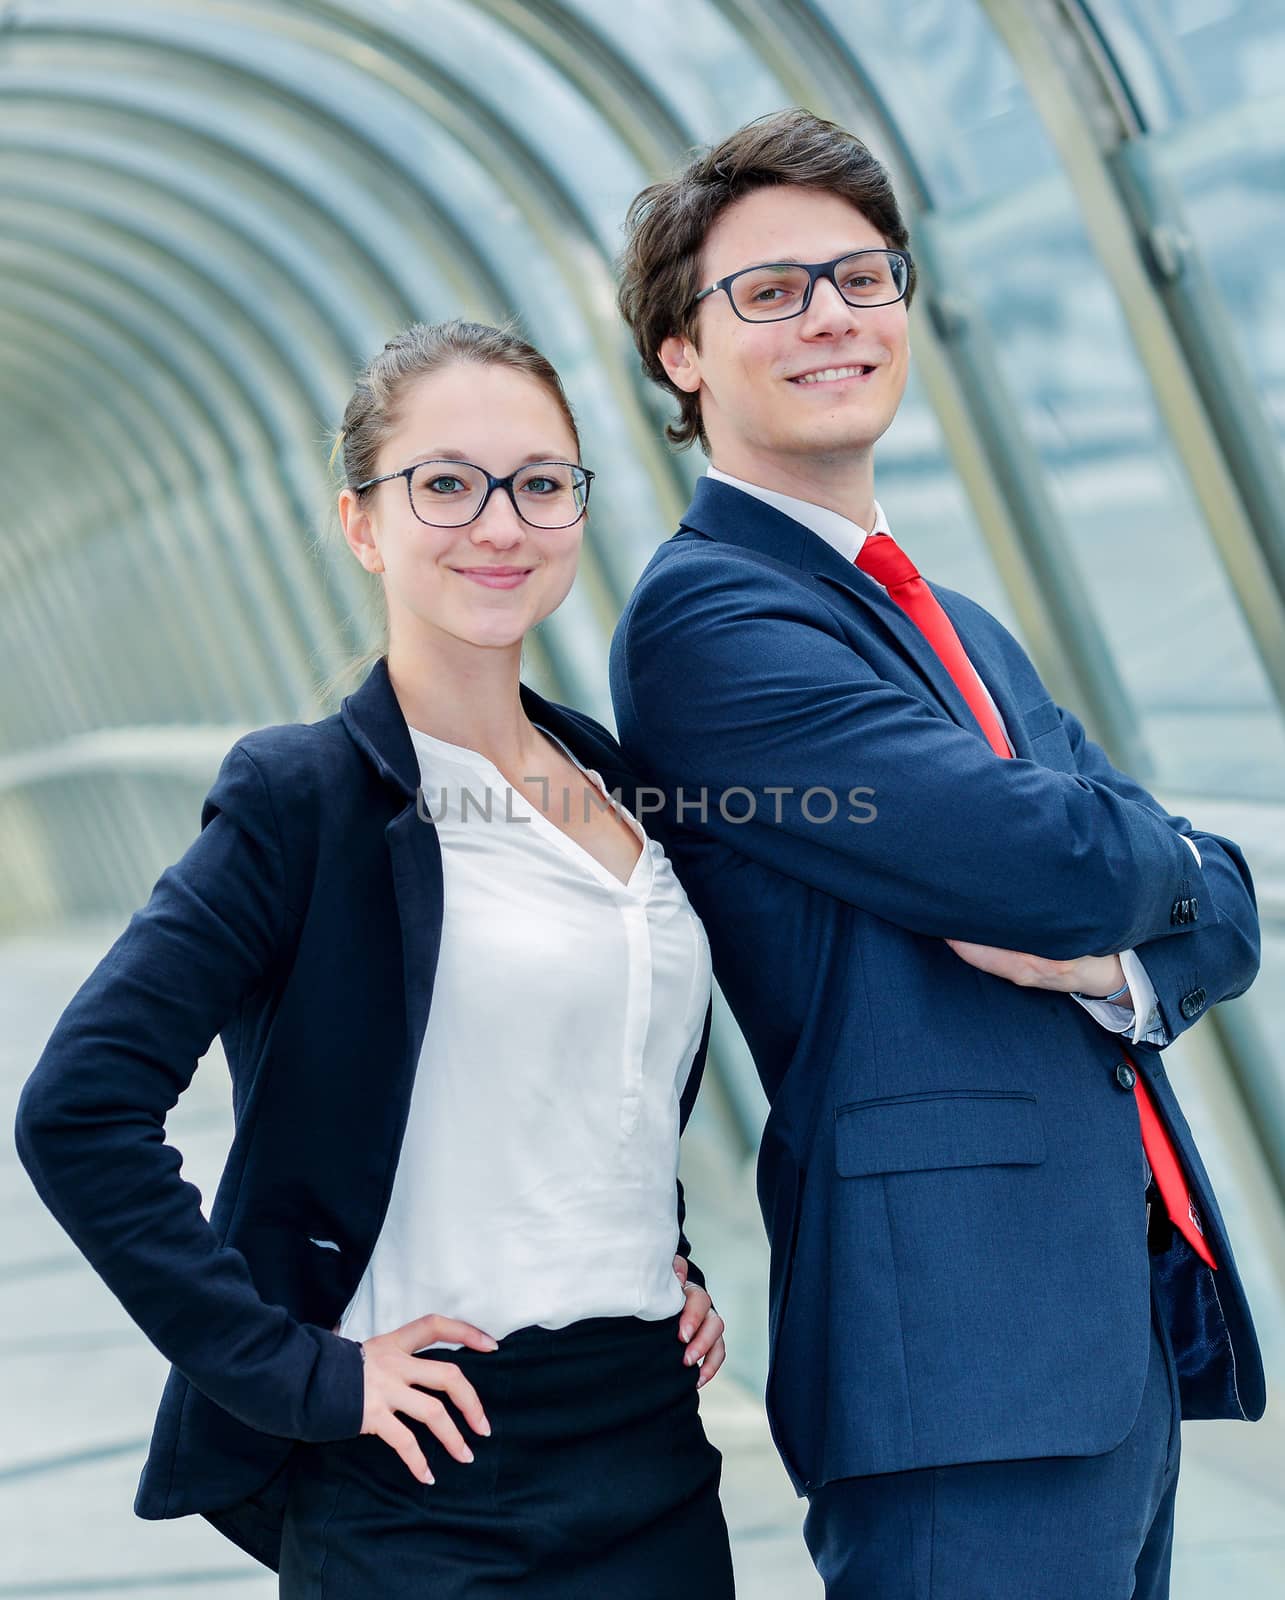 expressive portrait Junior executives of company crossed arms